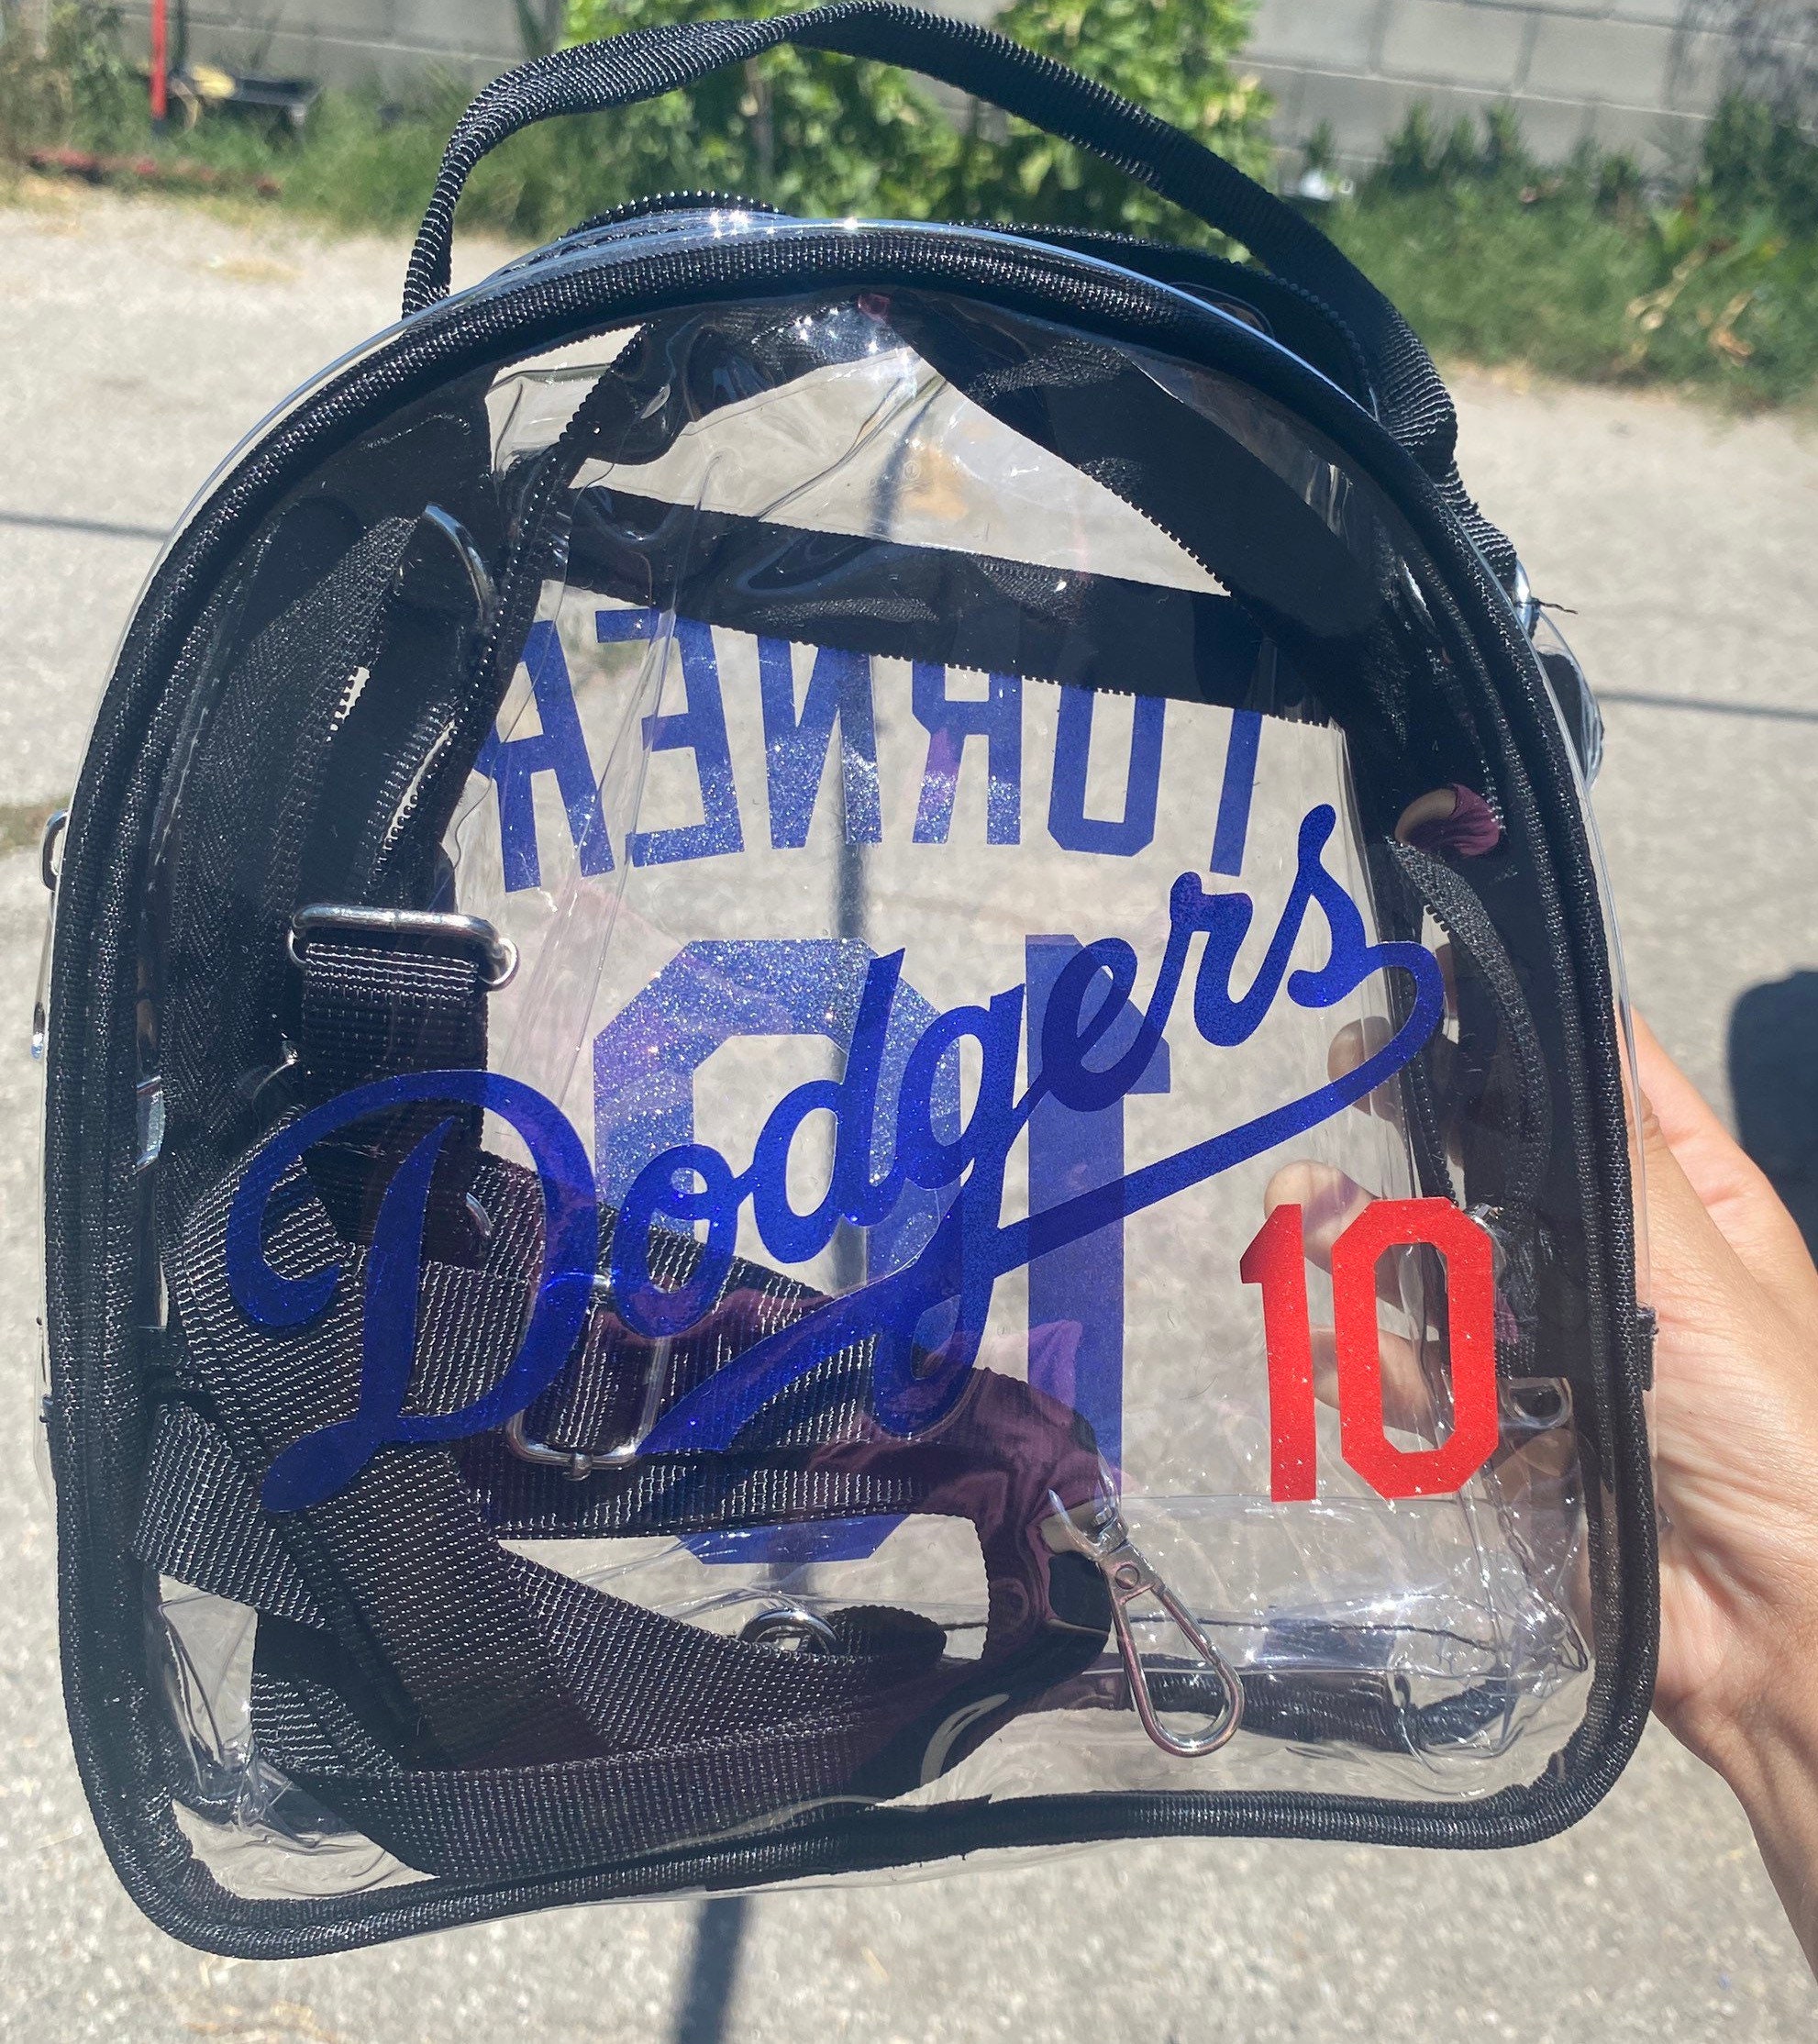 Looking to buy a clear bag to take into the stadium. This is technically  clear but worried it won't be allowed. Any thoughts? : r/Dodgers